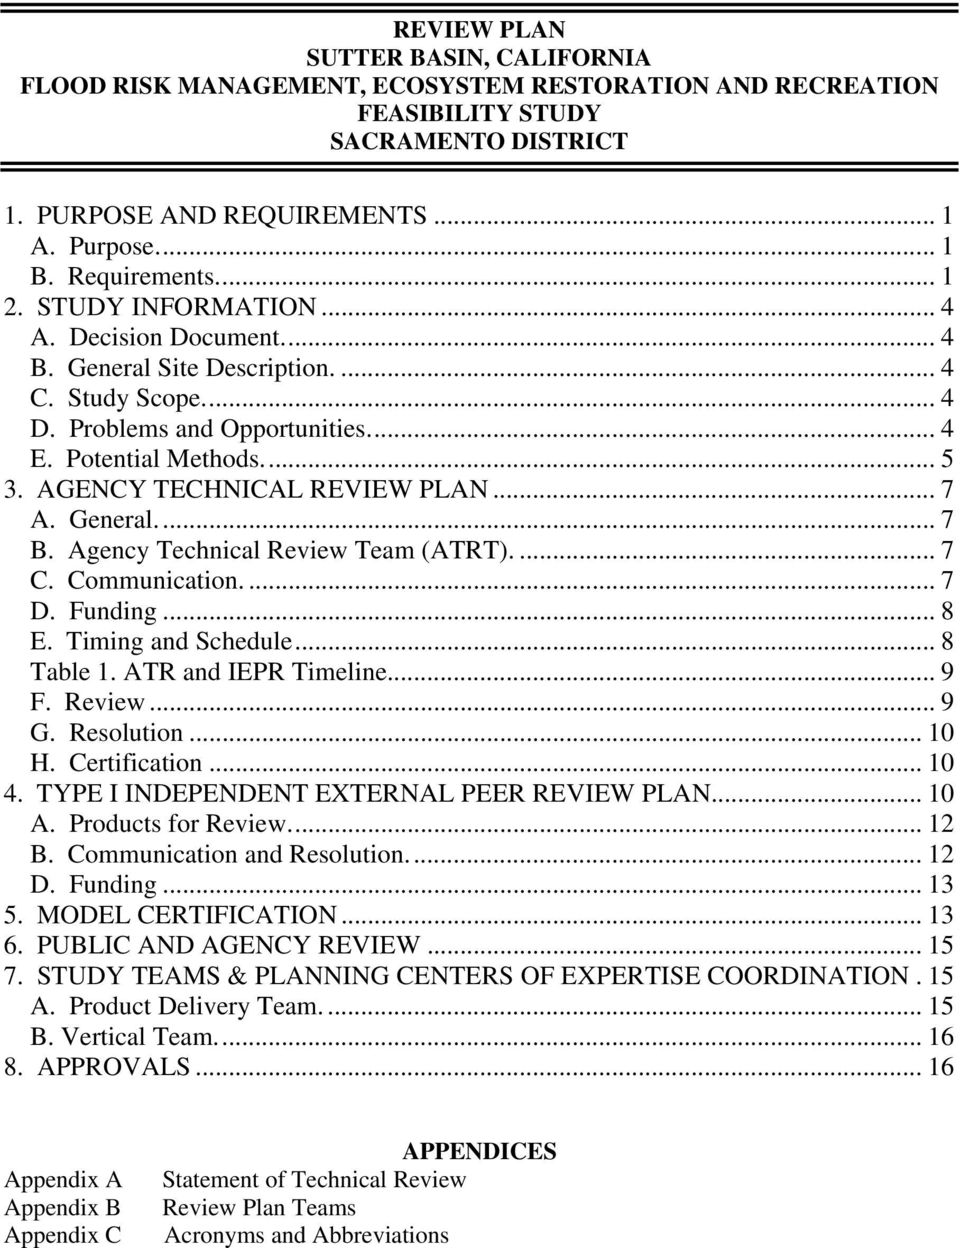 AGENCY TECHNICAL REVIEW PLAN... 7 A. General.... 7 B. Agency Technical Review Team (ATRT).... 7 C. Communication.... 7 D. Funding... 8 E. Timing and Schedule... 8 Table 1. ATR and IEPR Timeline... 9 F.